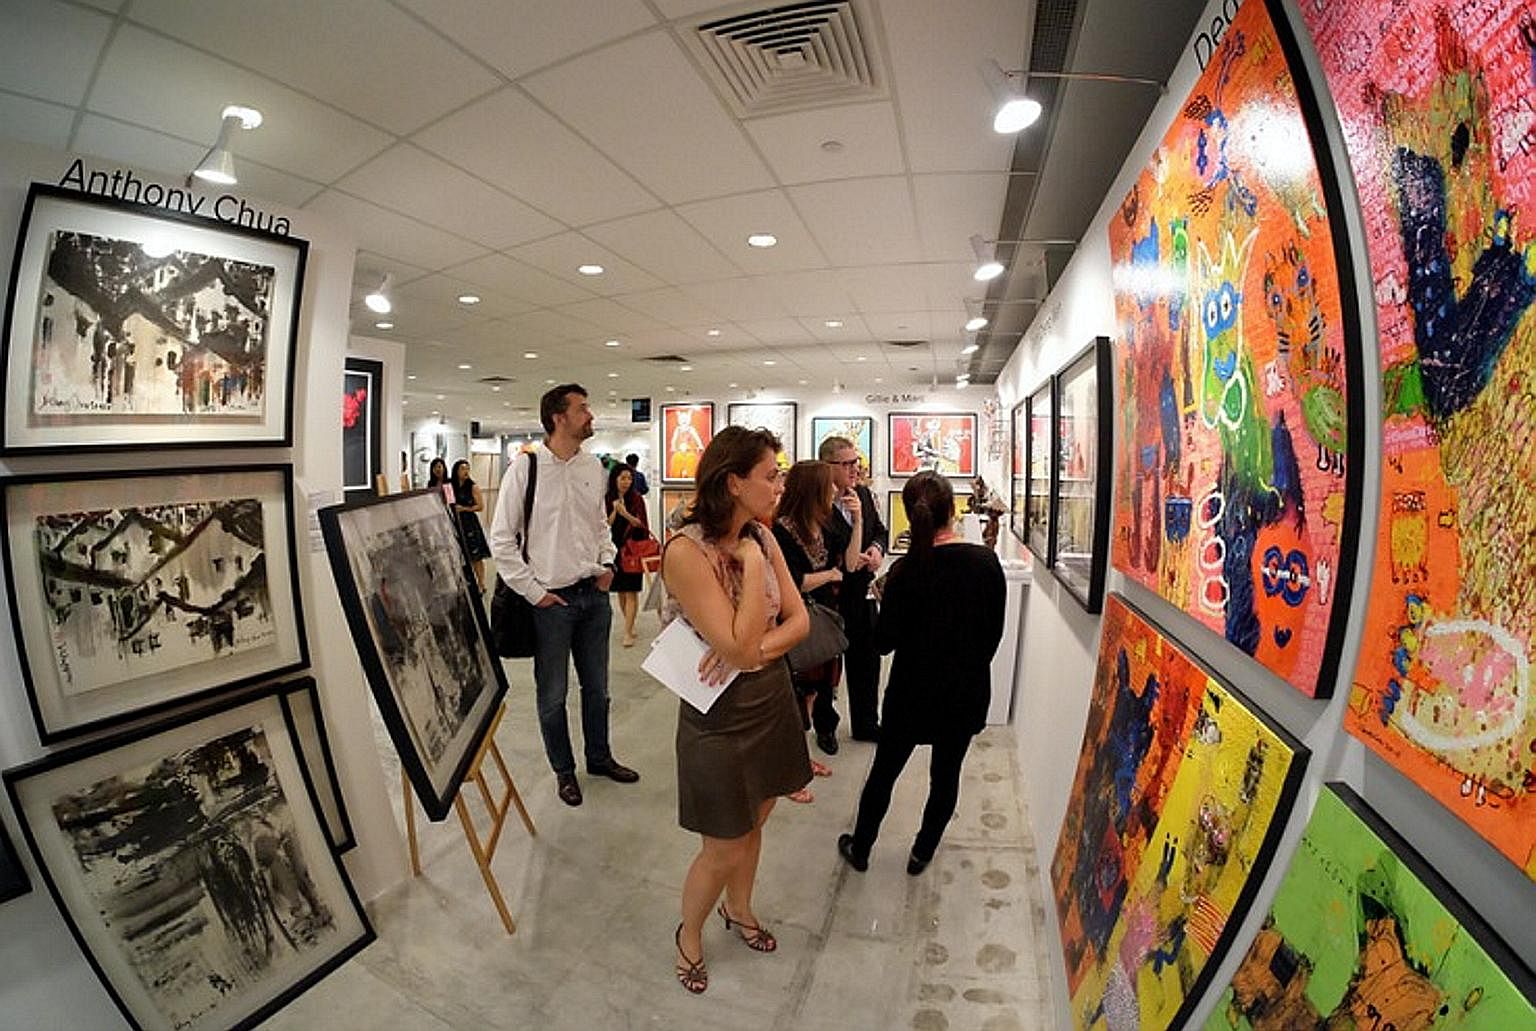 Singapore's visual arts scene has undergone a transformation in the past decade and more people are not just looking at art, but also buying it as well.